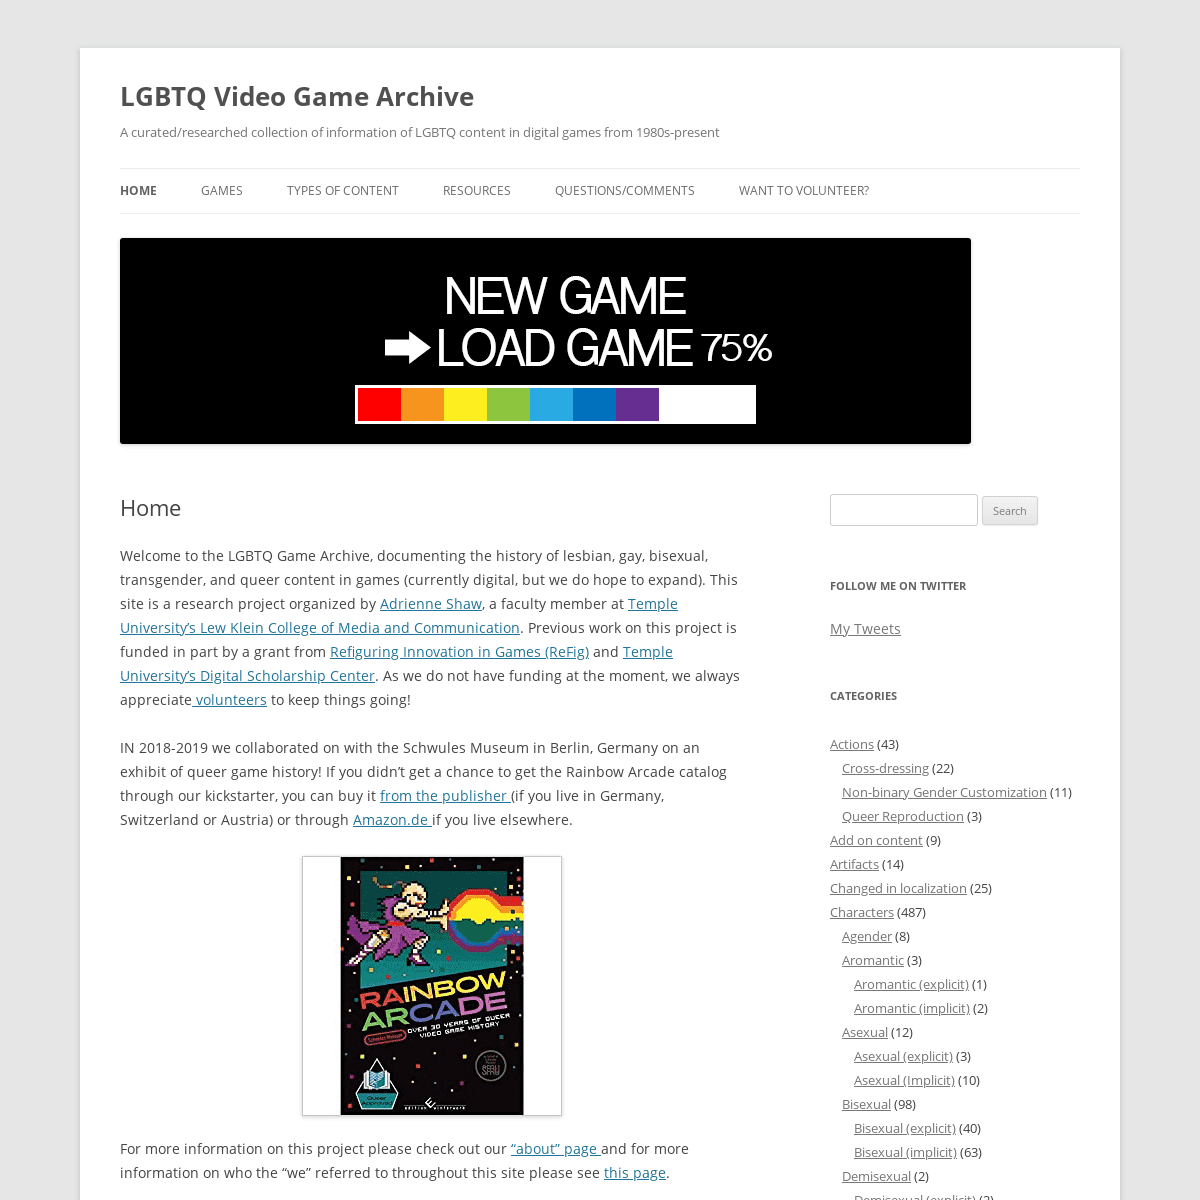 A complete backup of https://lgbtqgamearchive.com